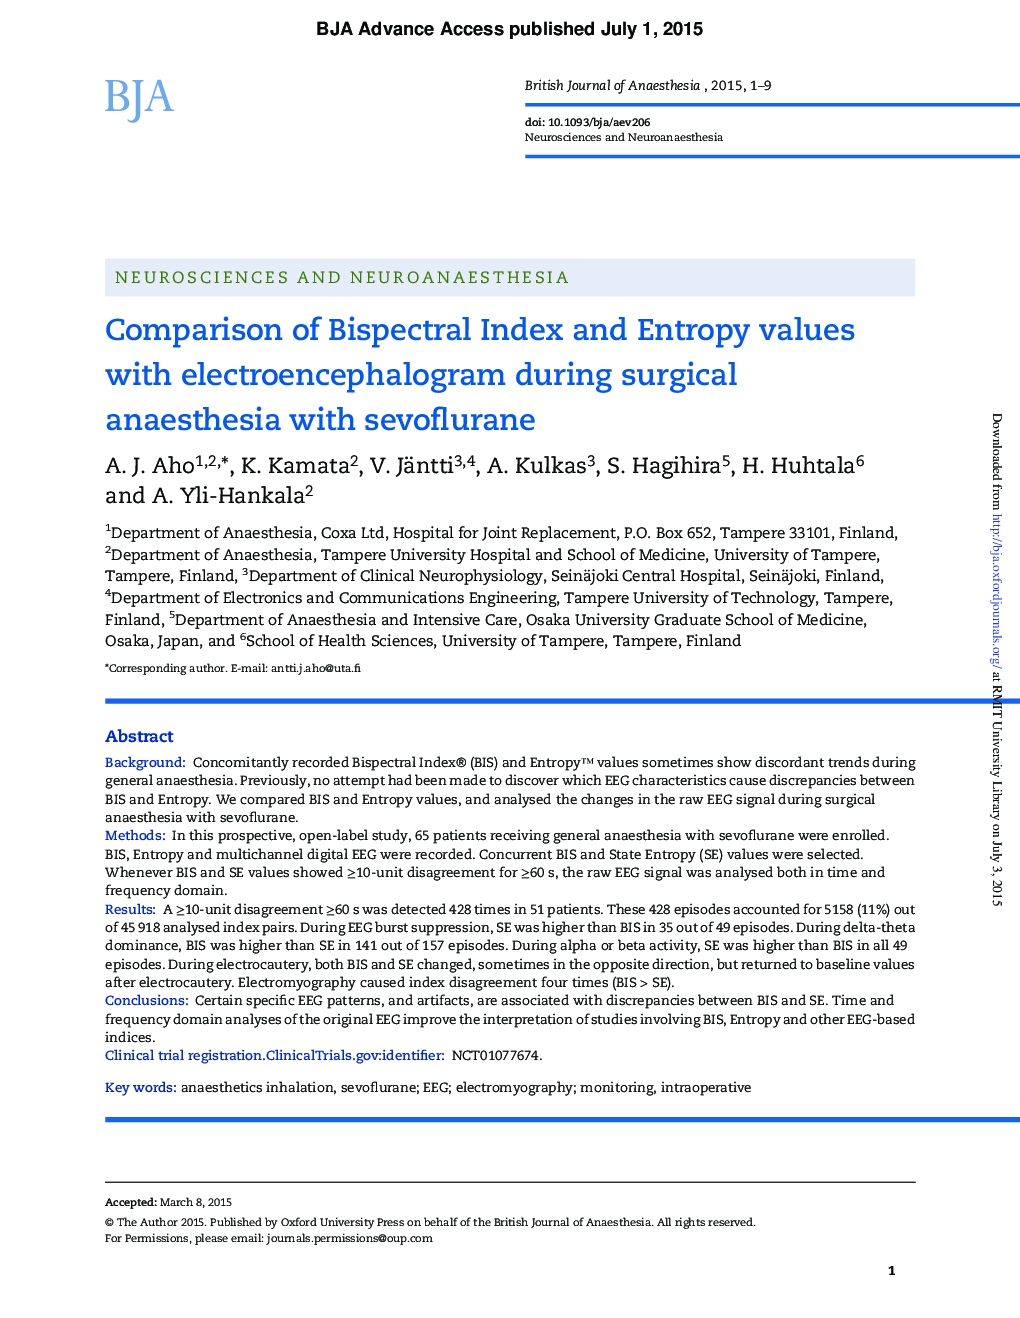 Comparison of Bispectral Index and Entropy values with electroencephalogram during surgical anaesthesia with sevofluraneâ 